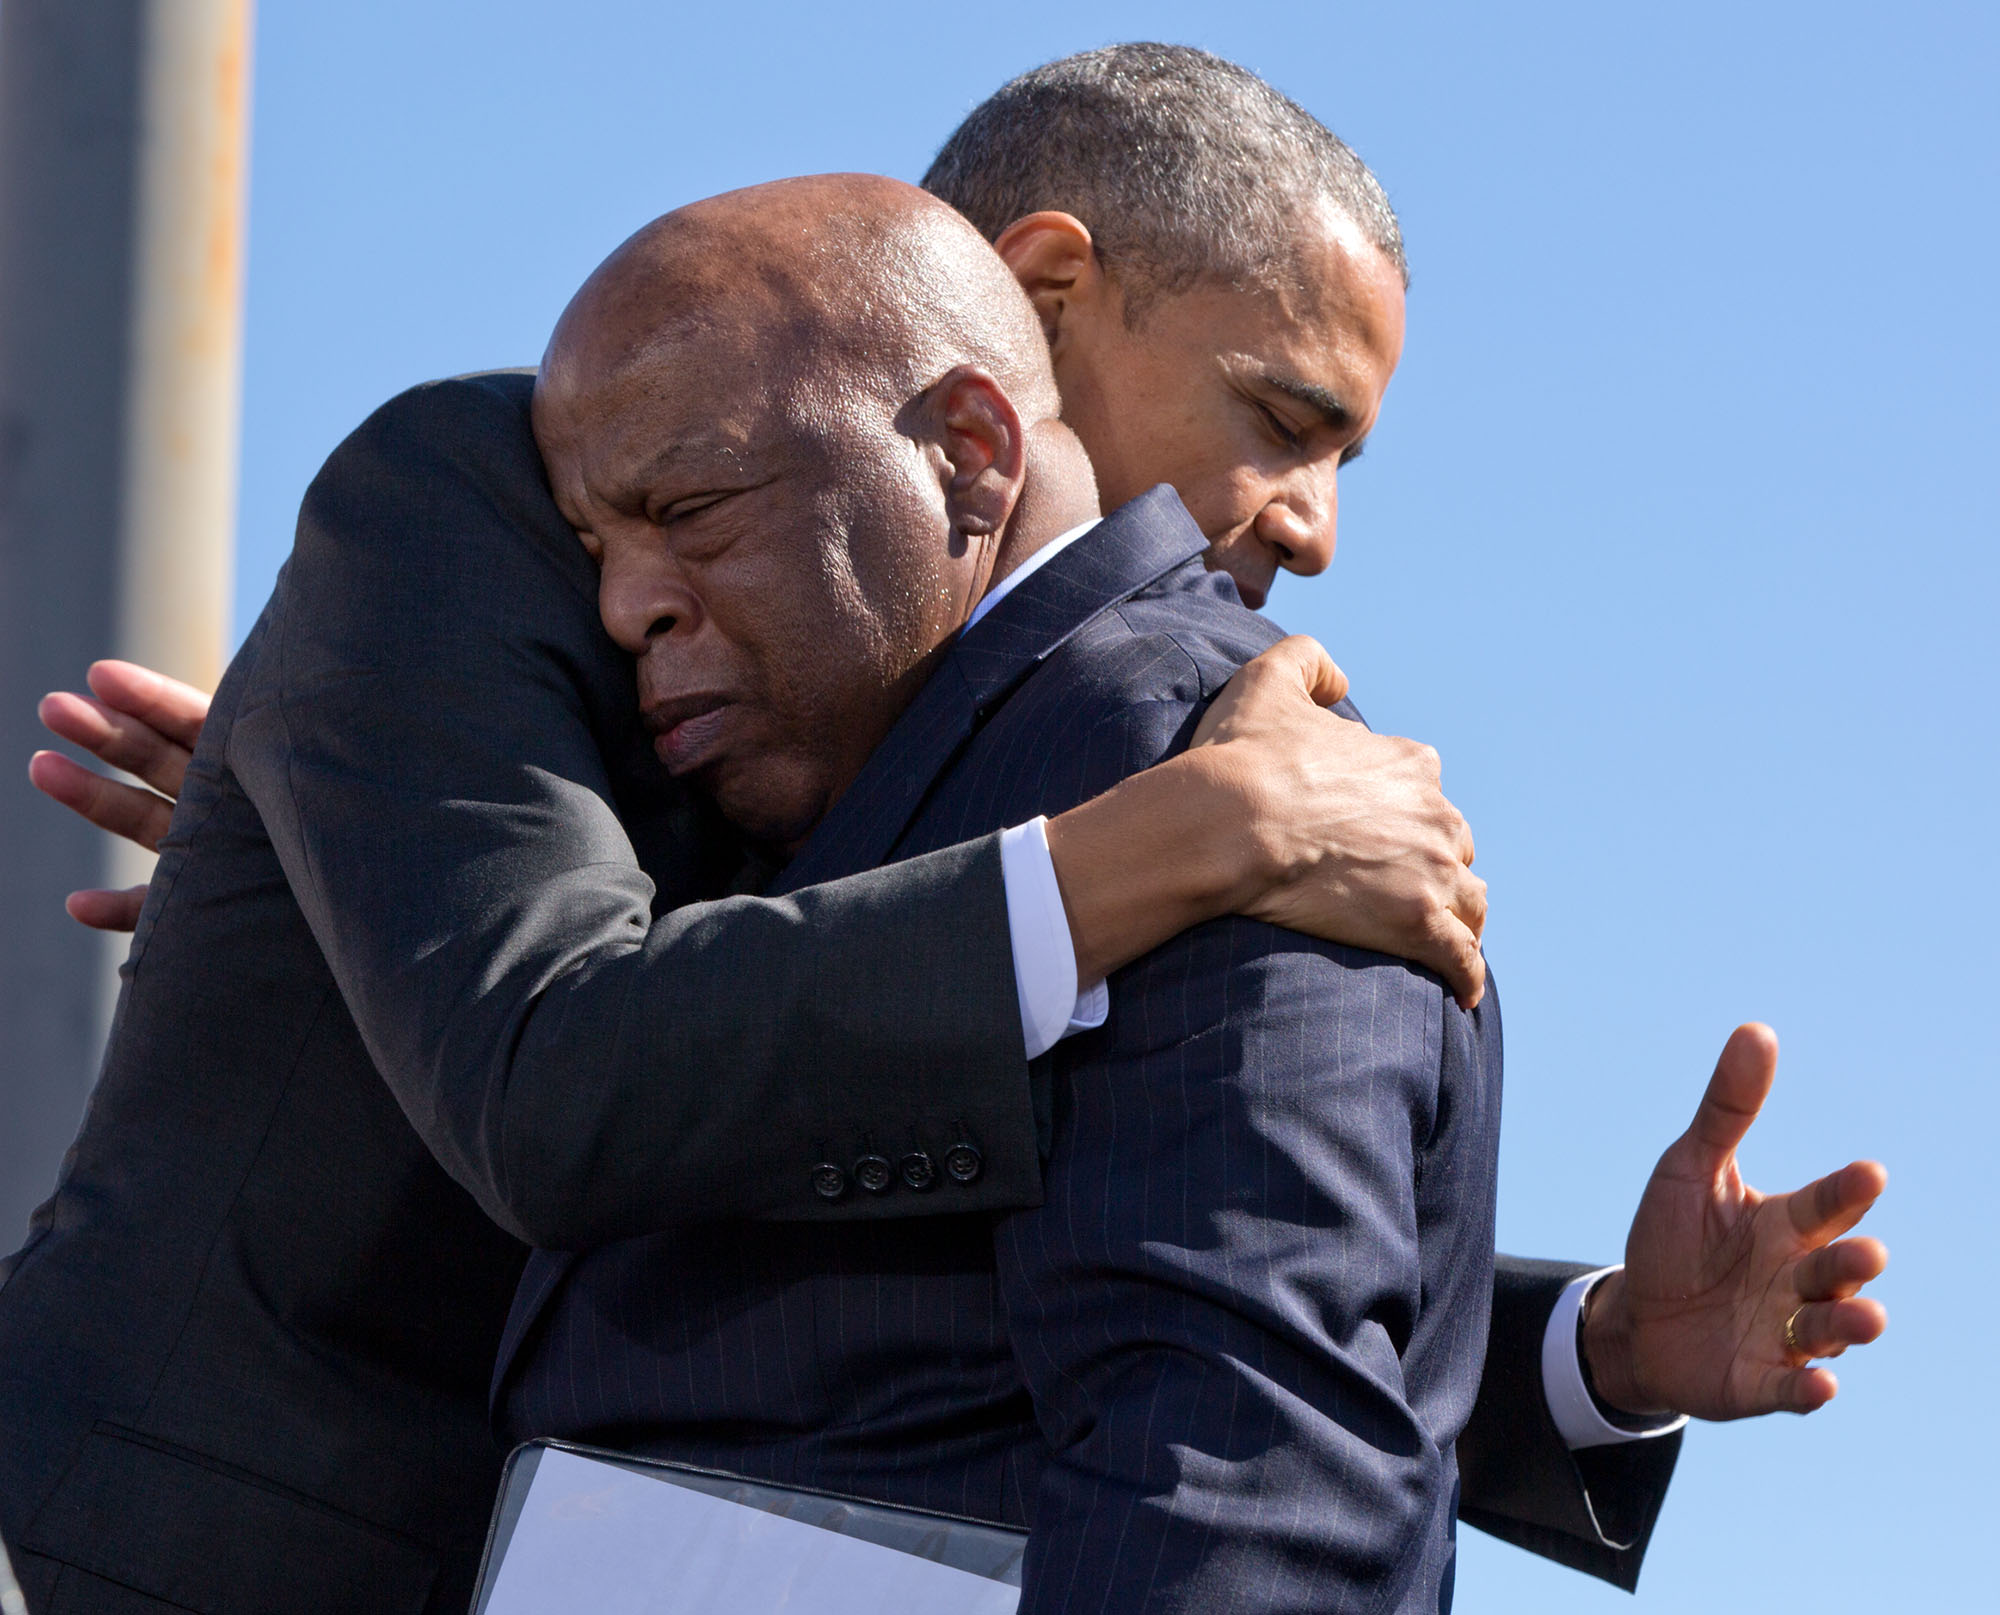 The President hugs Rep. John Lewis after his introduction. (Official White House Photo by Pete Souza)